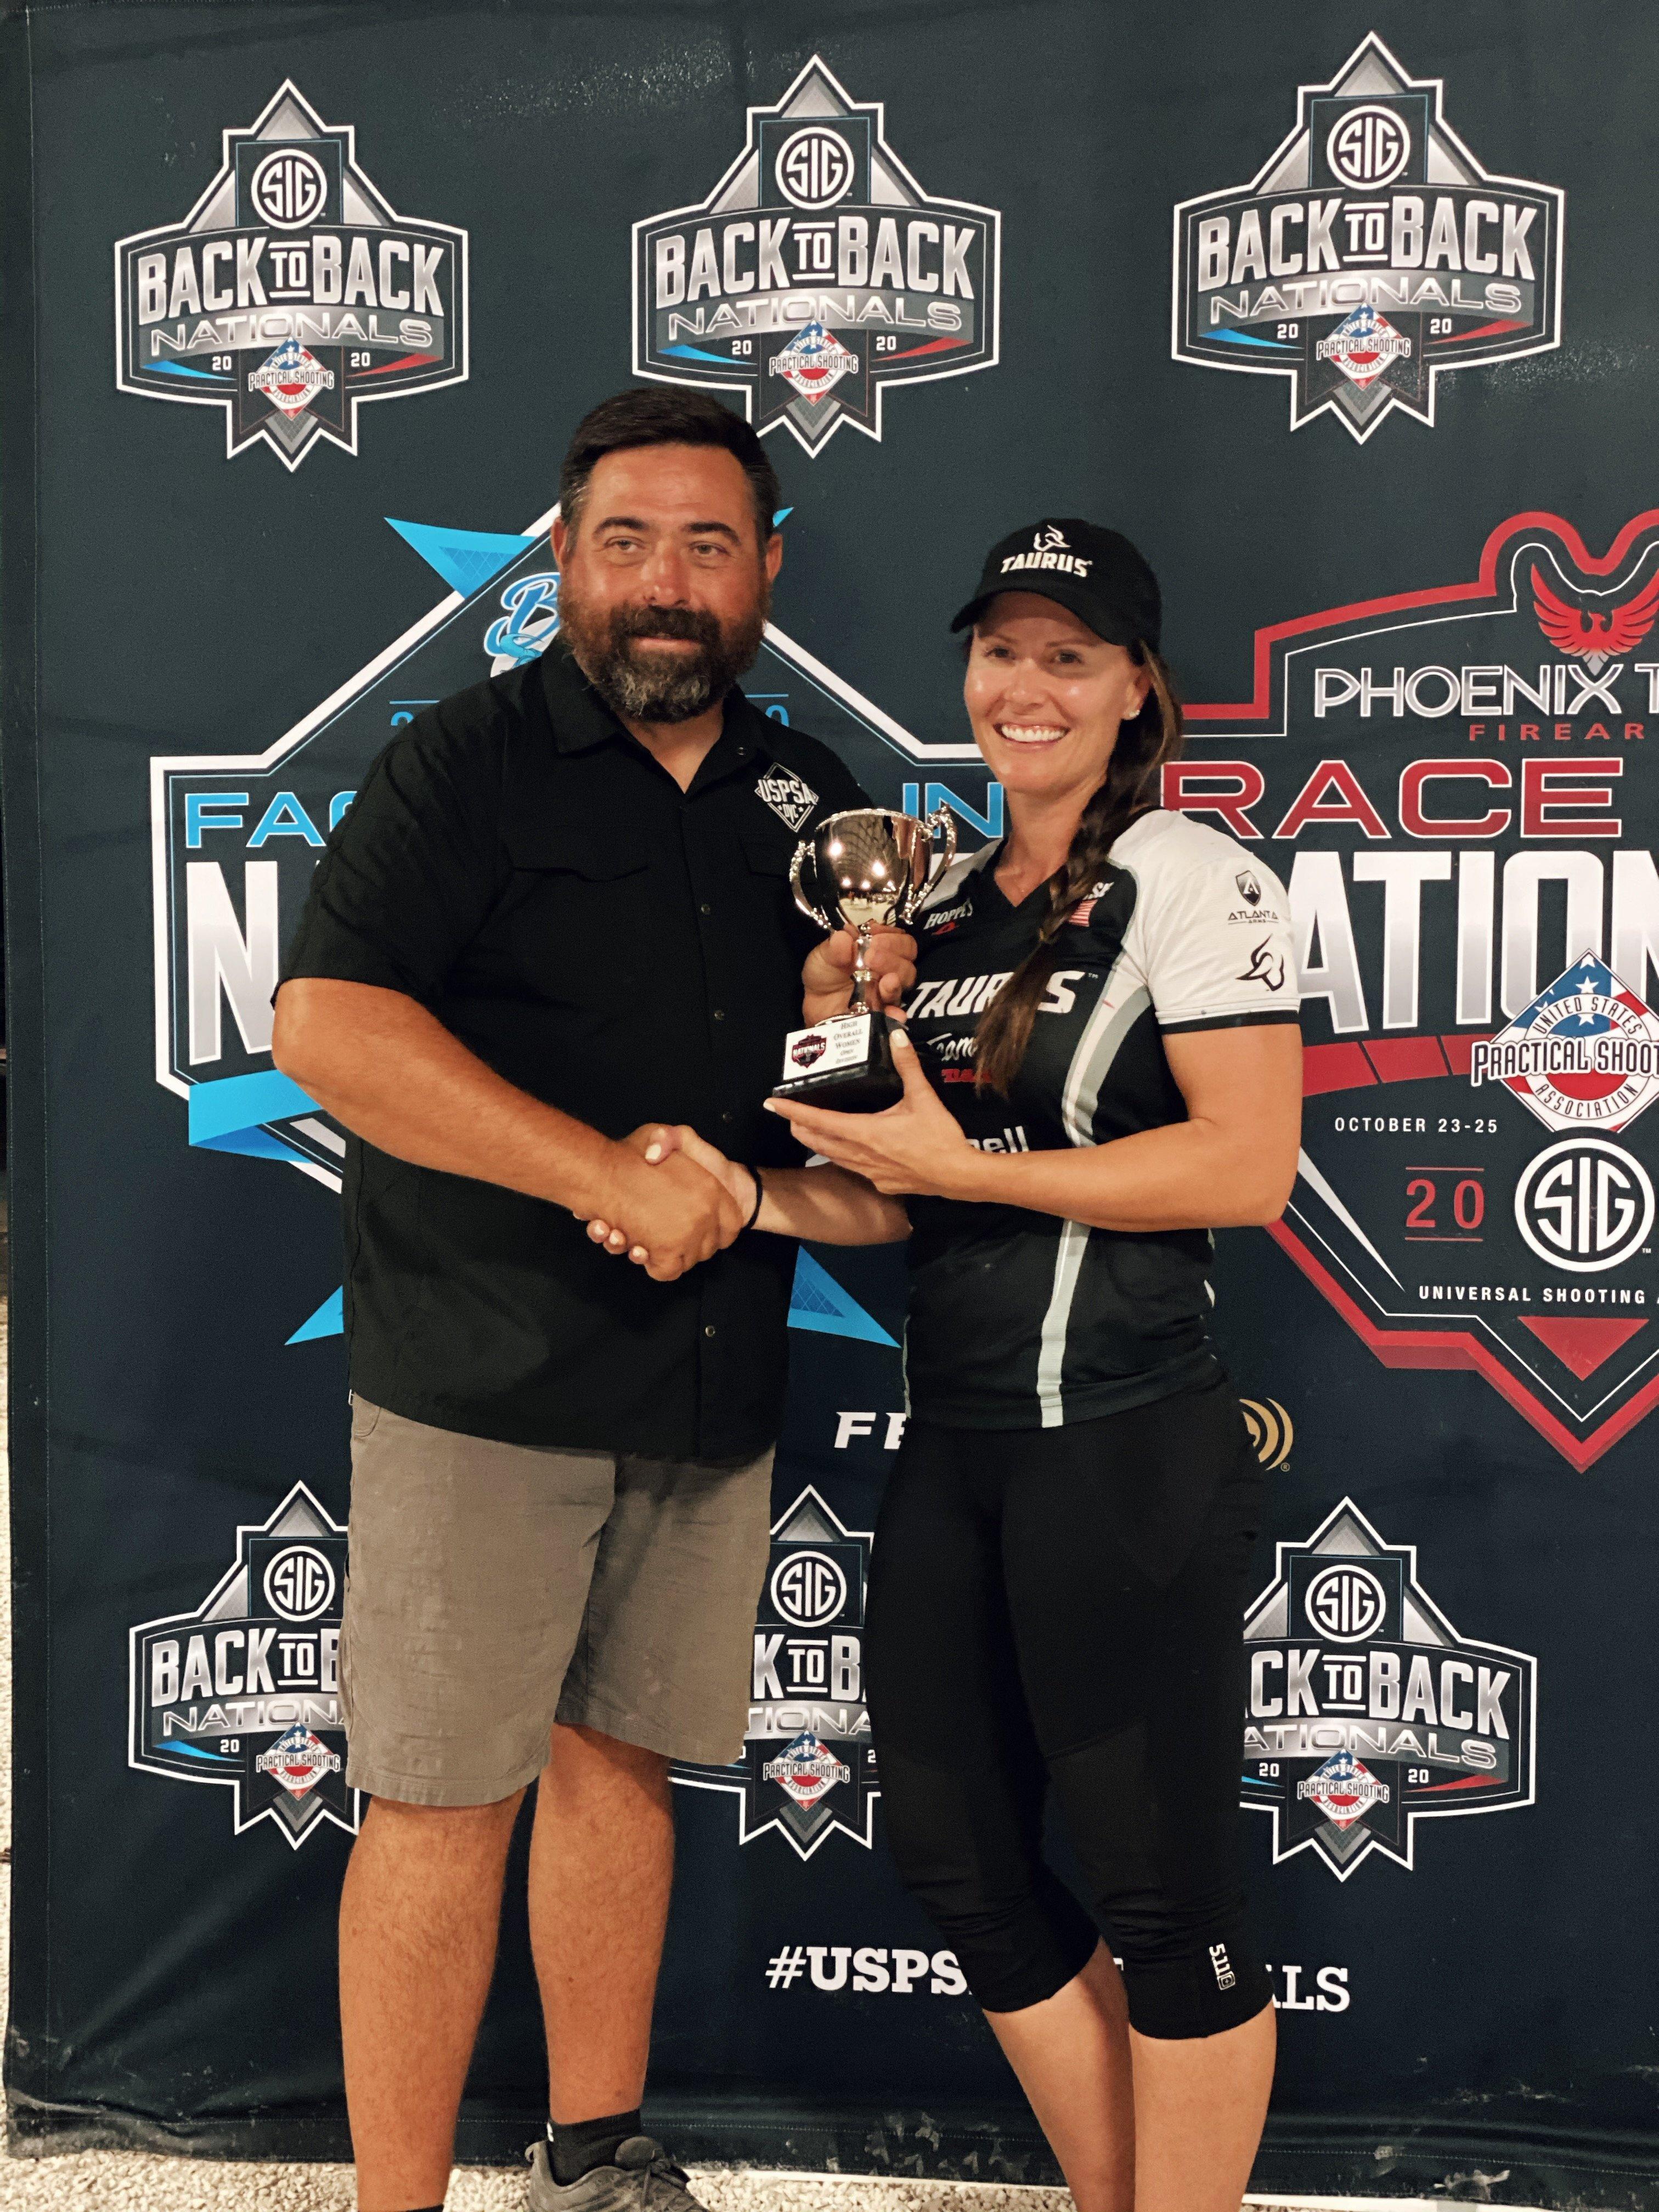 President of USPSA, Mike Foley, congratulates Jessie Harrison for her win at the 2020 Race Gun Nationals.